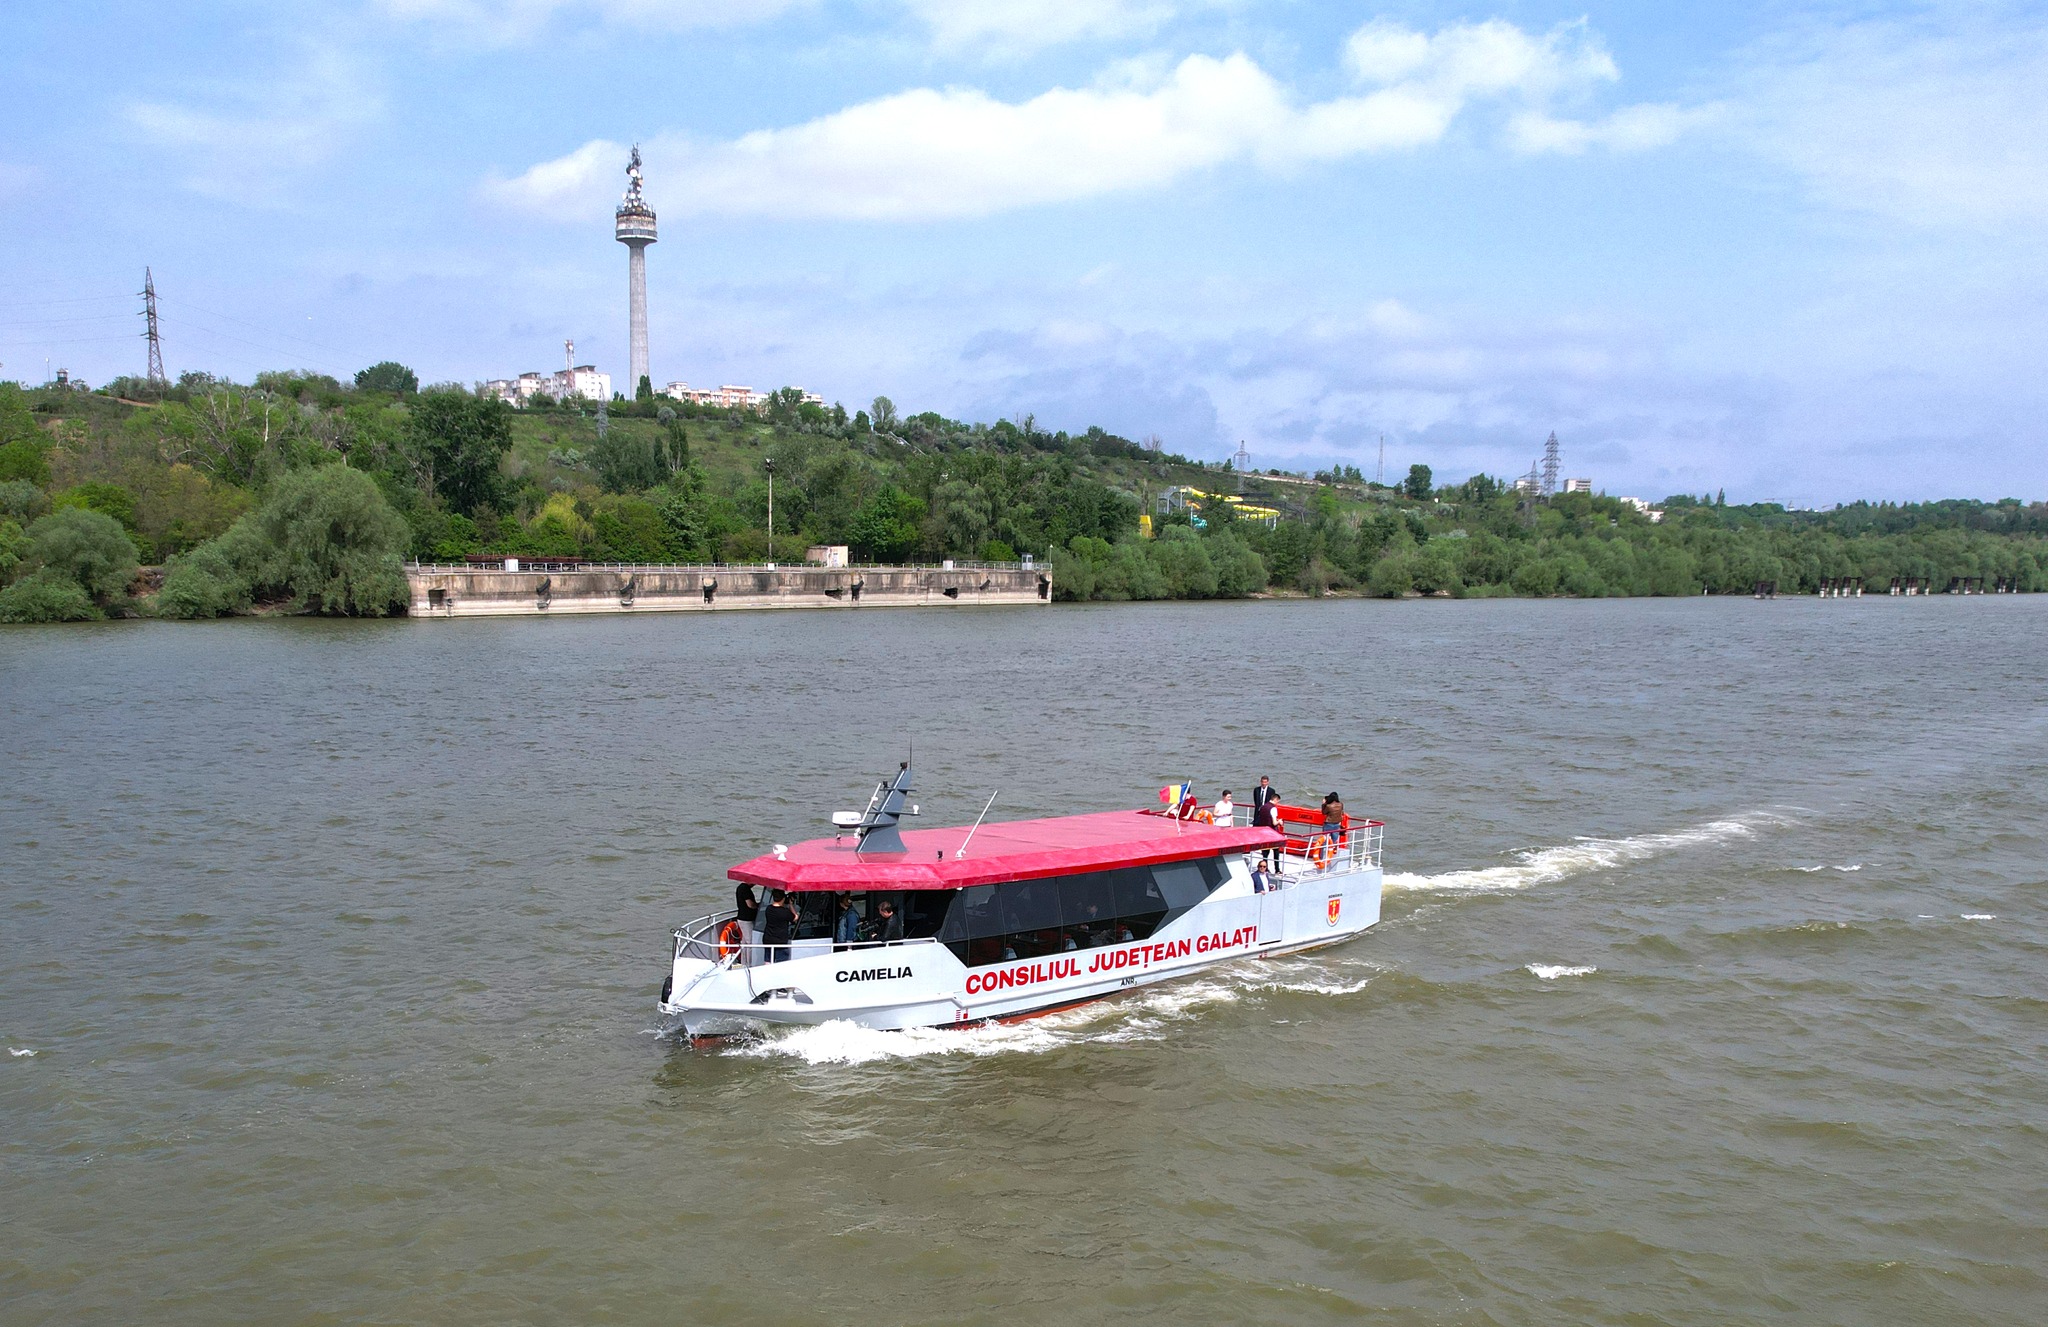 Southern Romania: Galaţi County launches ship for leisure cruises on the Danube